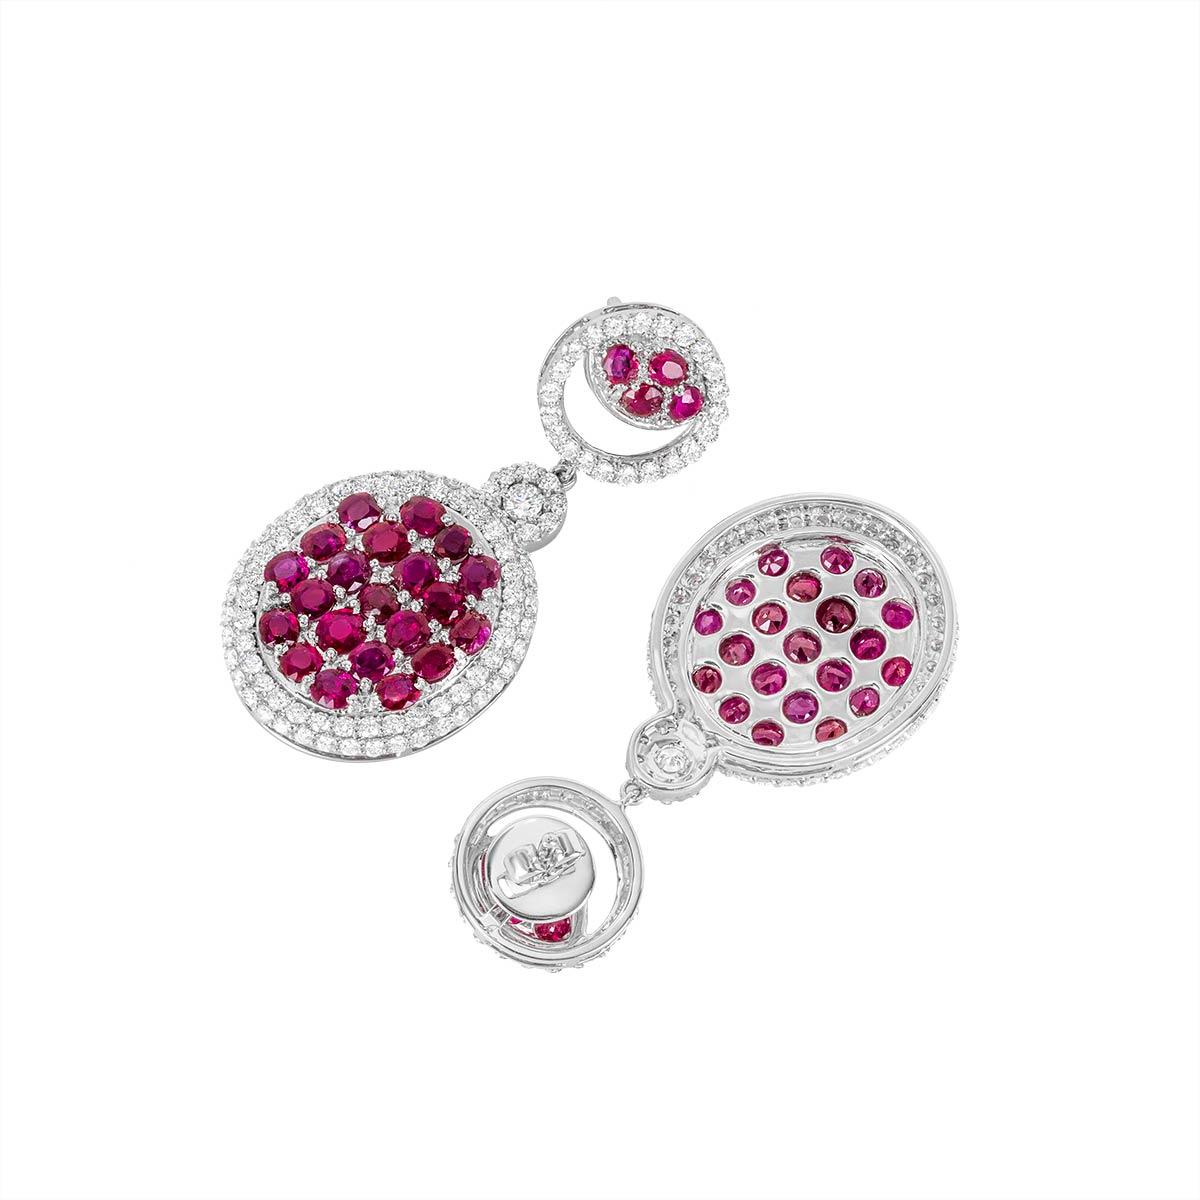 Round Cut Diamond and Ruby Dangle Earrings 10.0 Carat Rubies and 4.11 Carat Diamonds For Sale